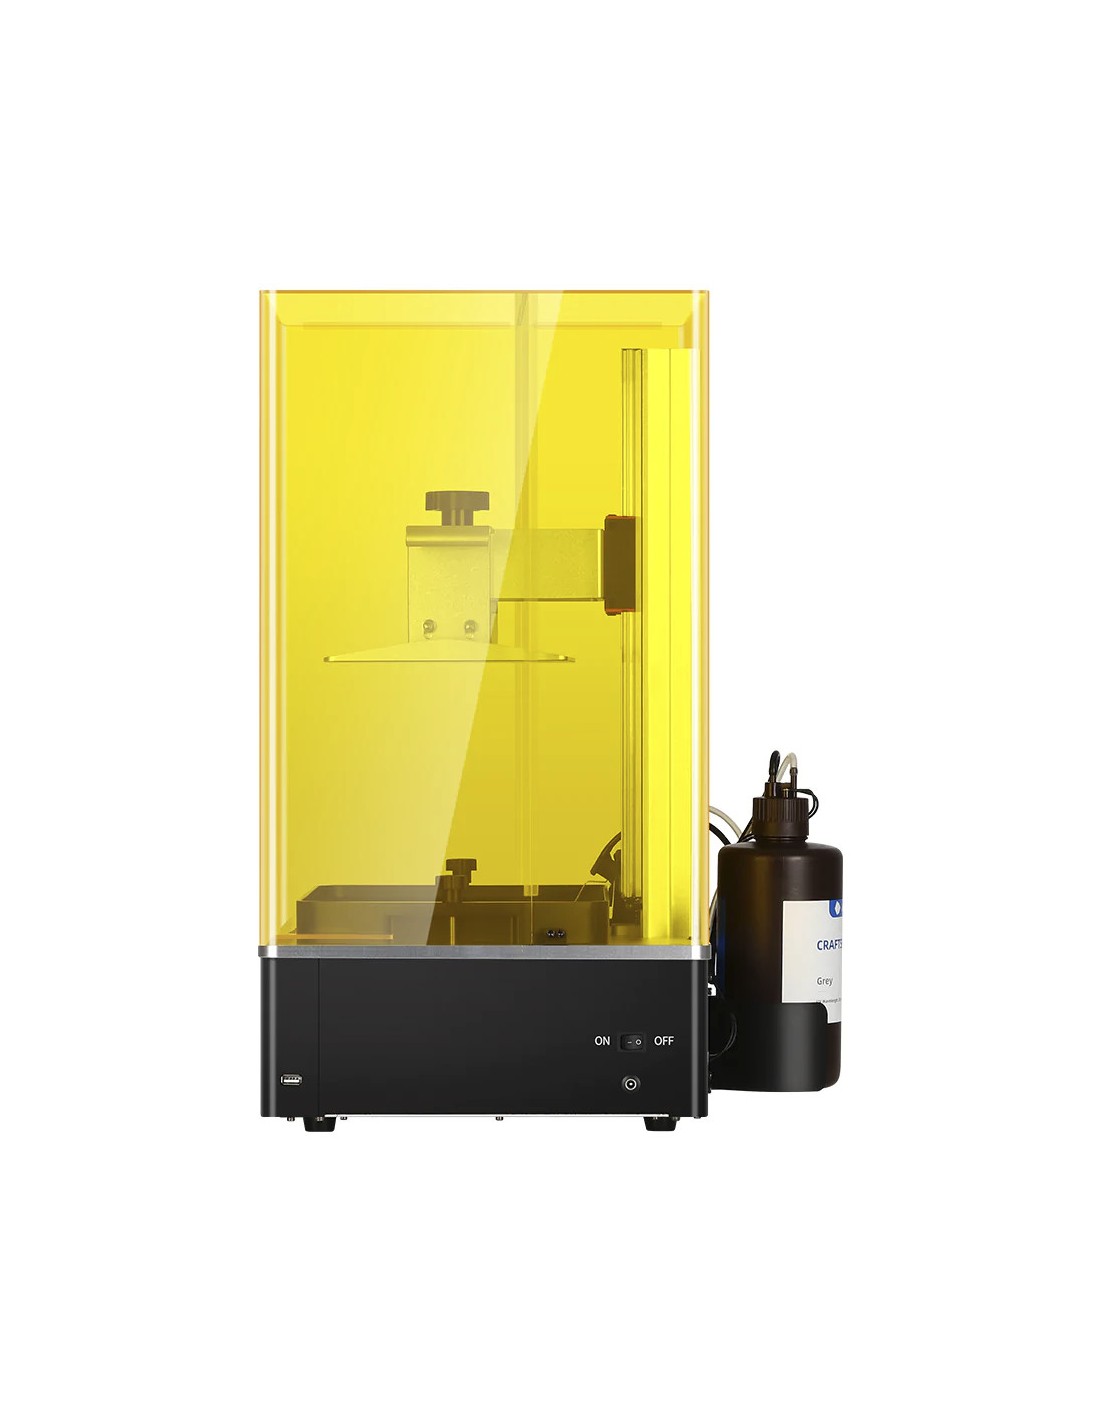 Anycubic Photon M3 Max resin 3D-printer